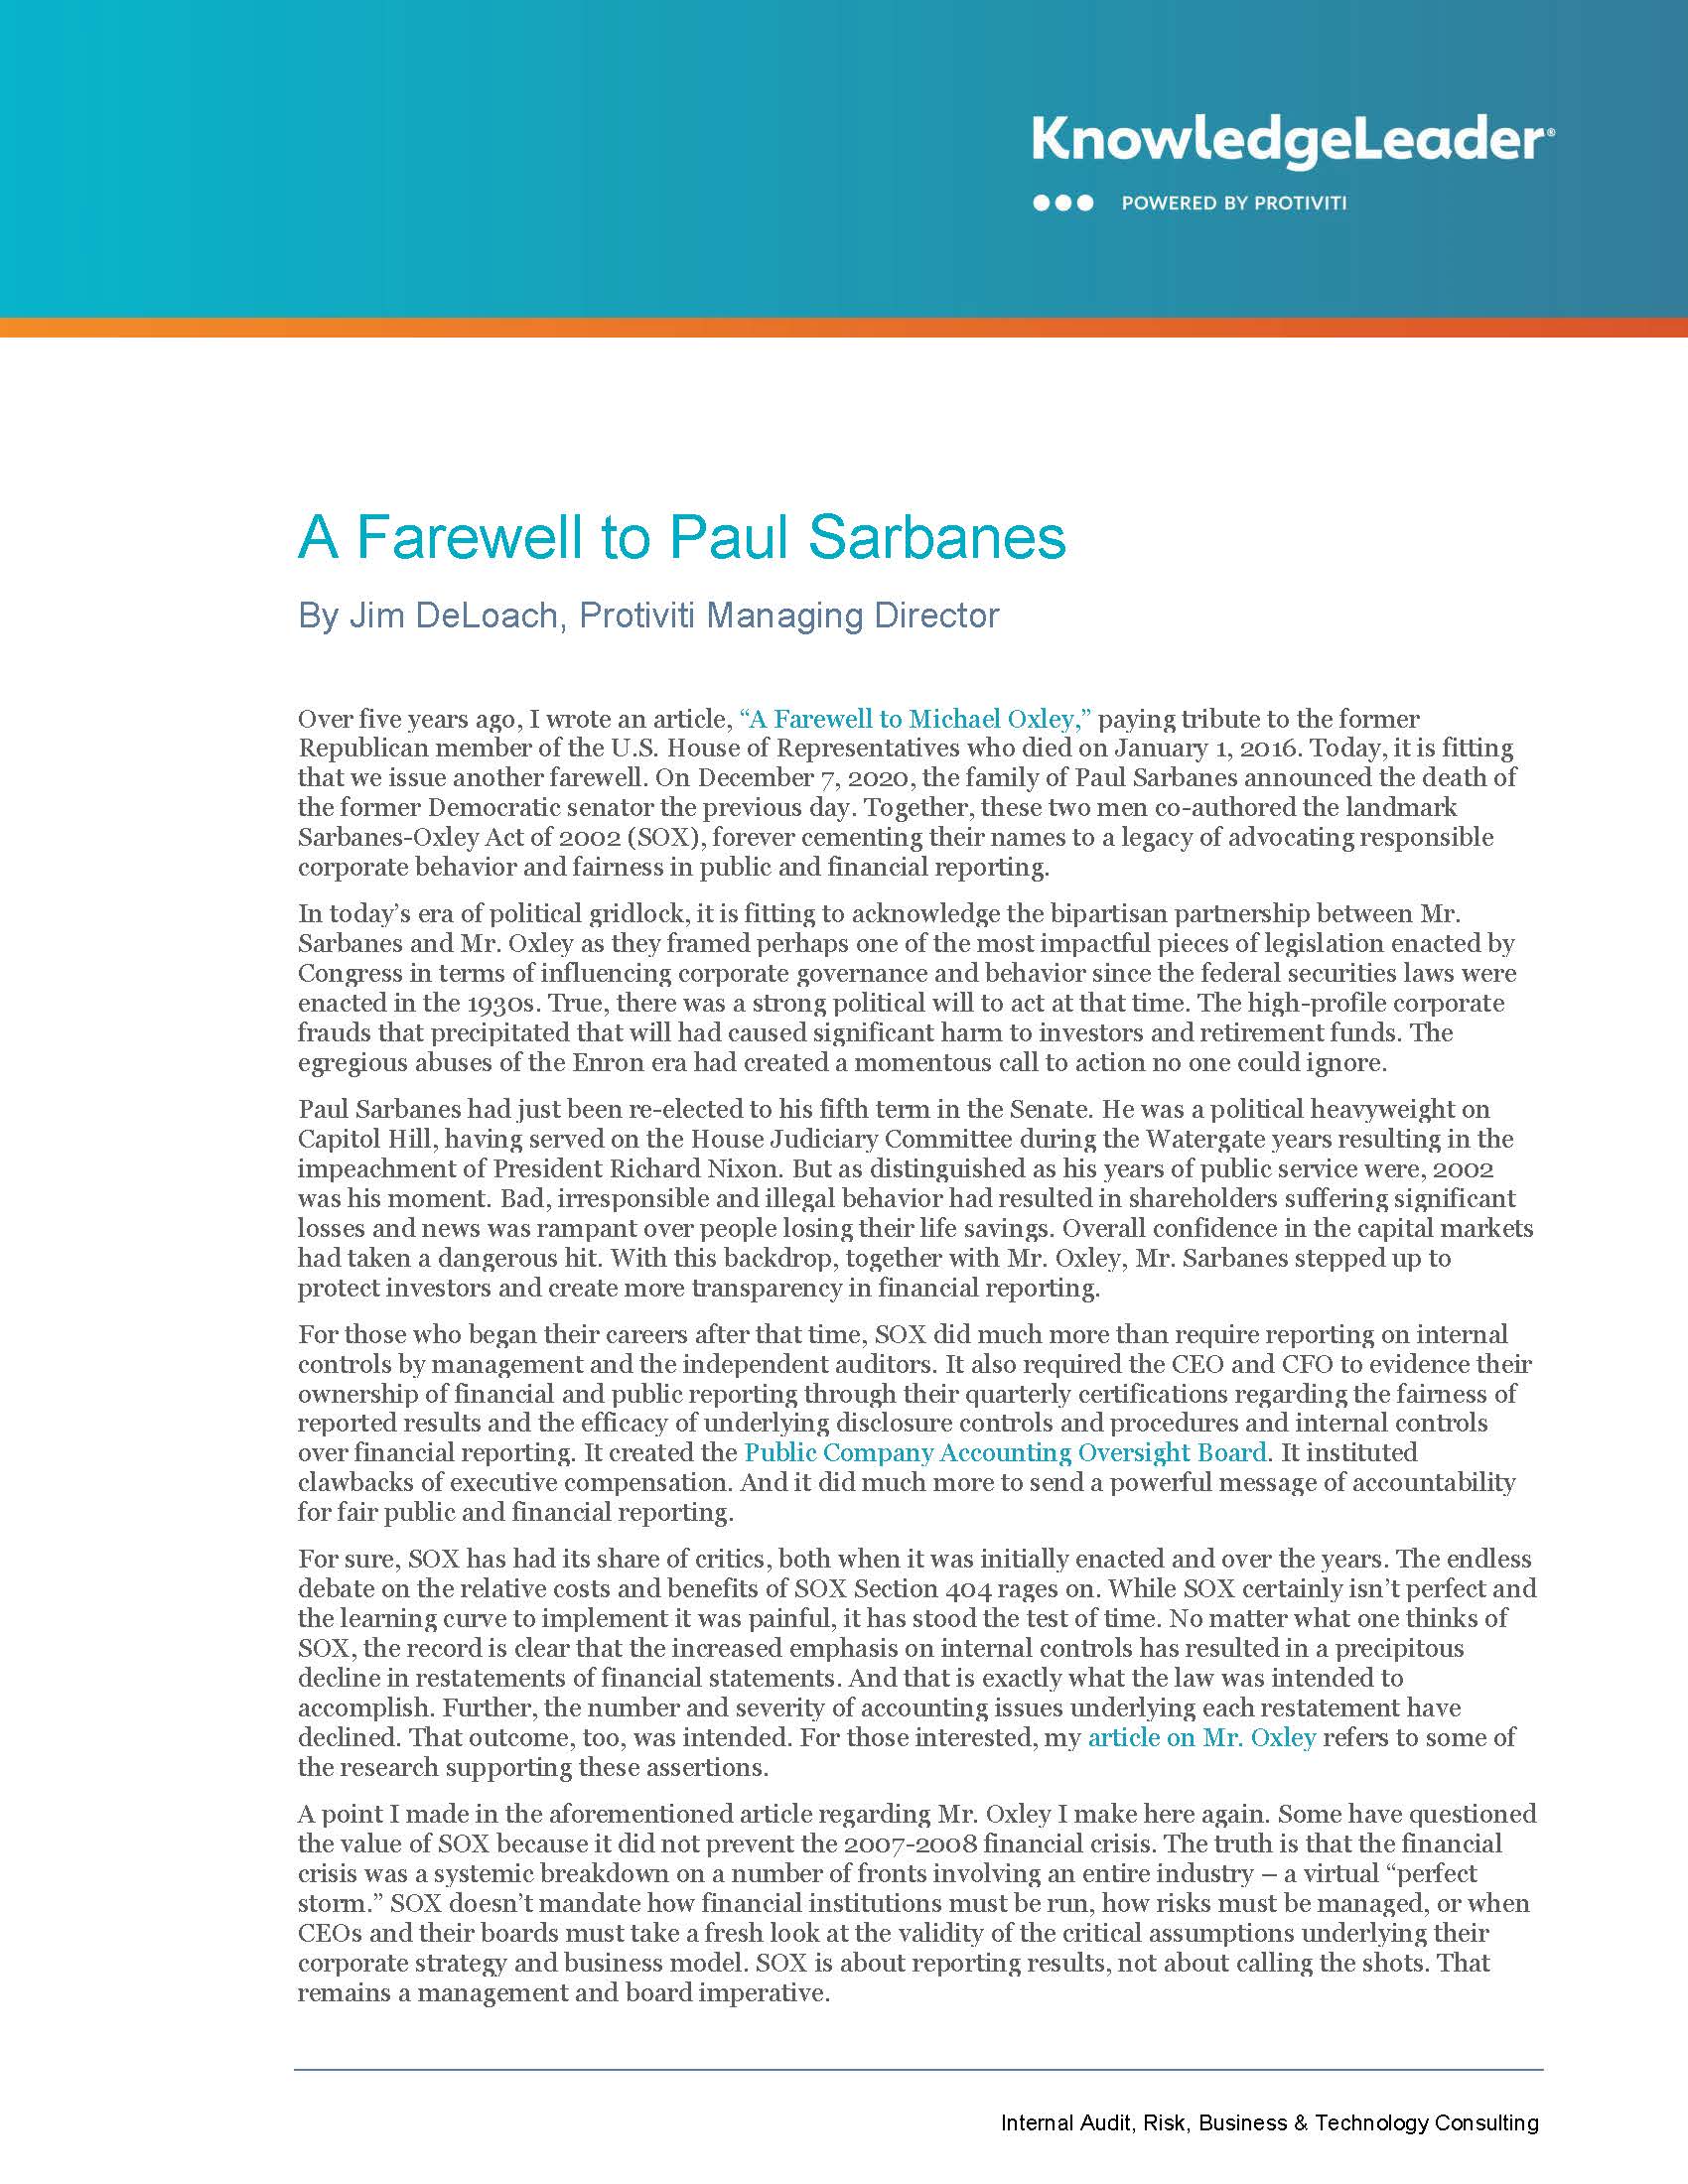 Screenshot of the first page of A Farewell to Paul Sarbanes